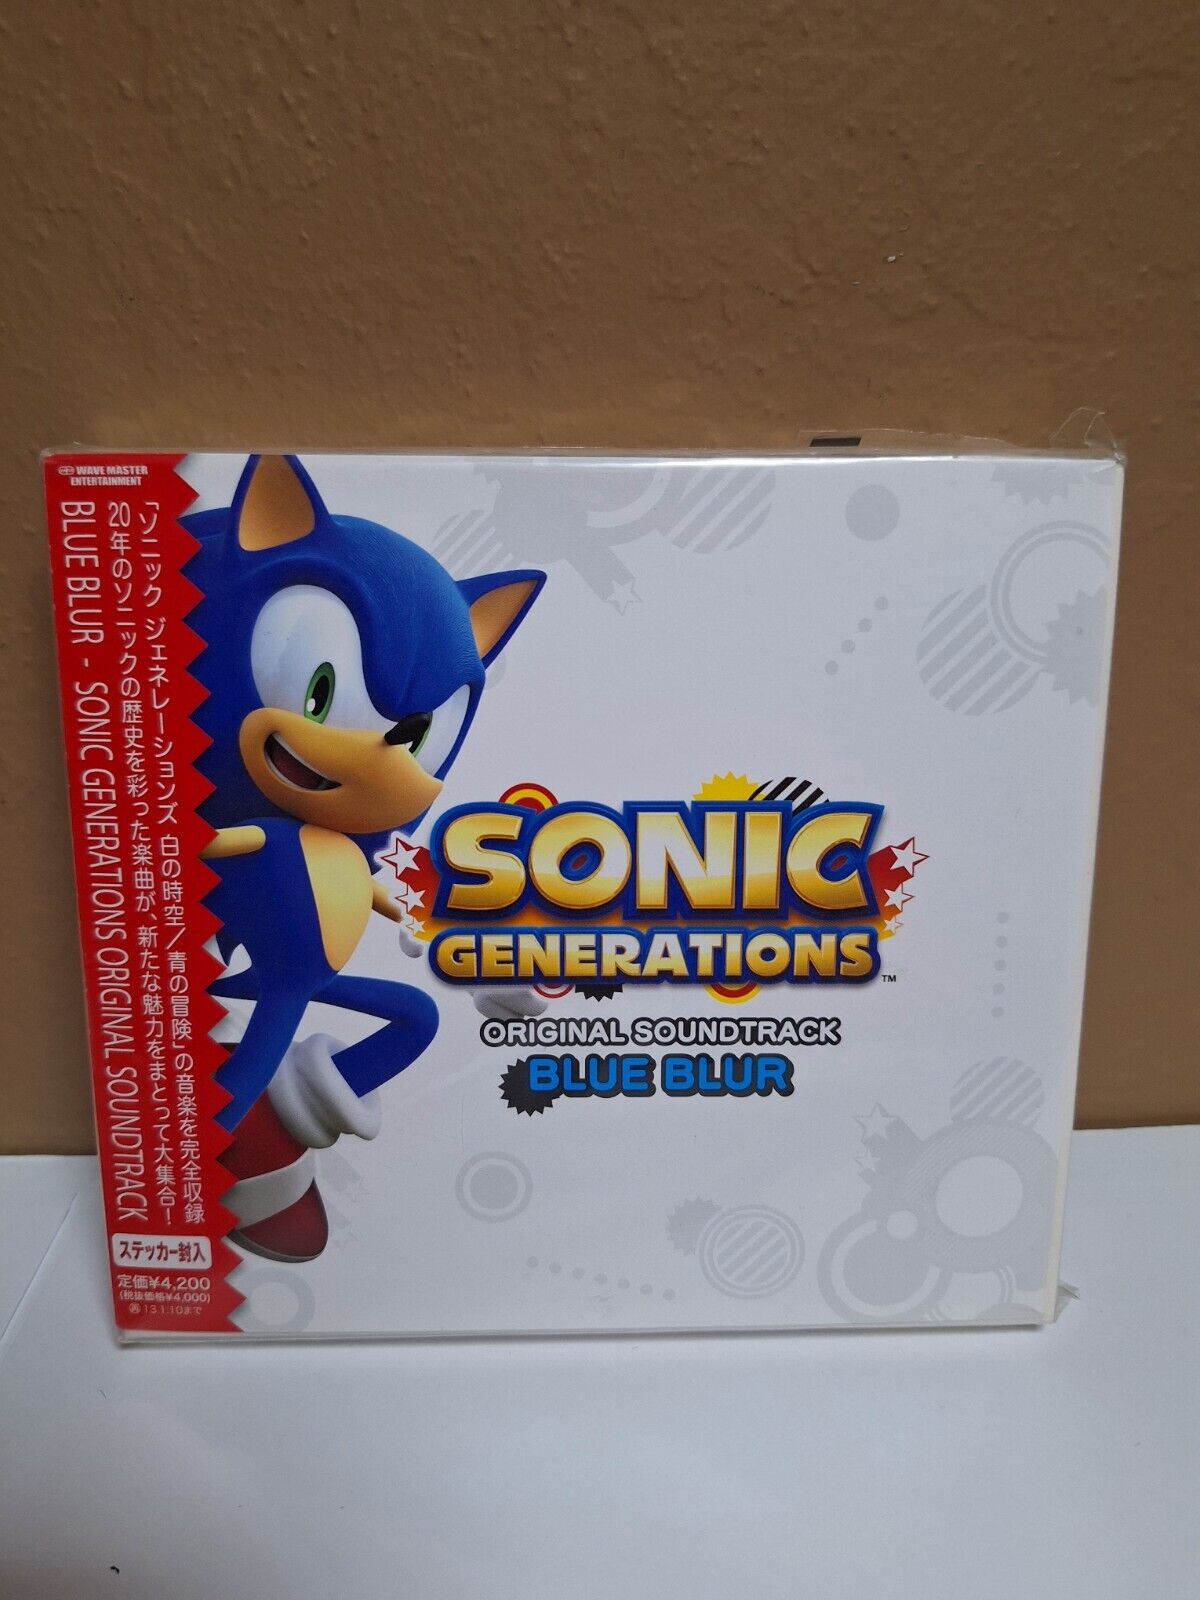 SAMPLE VERSION EXTREMELY RARE SONIC Soundtrack GENERATIONS BLUE BLUR GRAIL READ